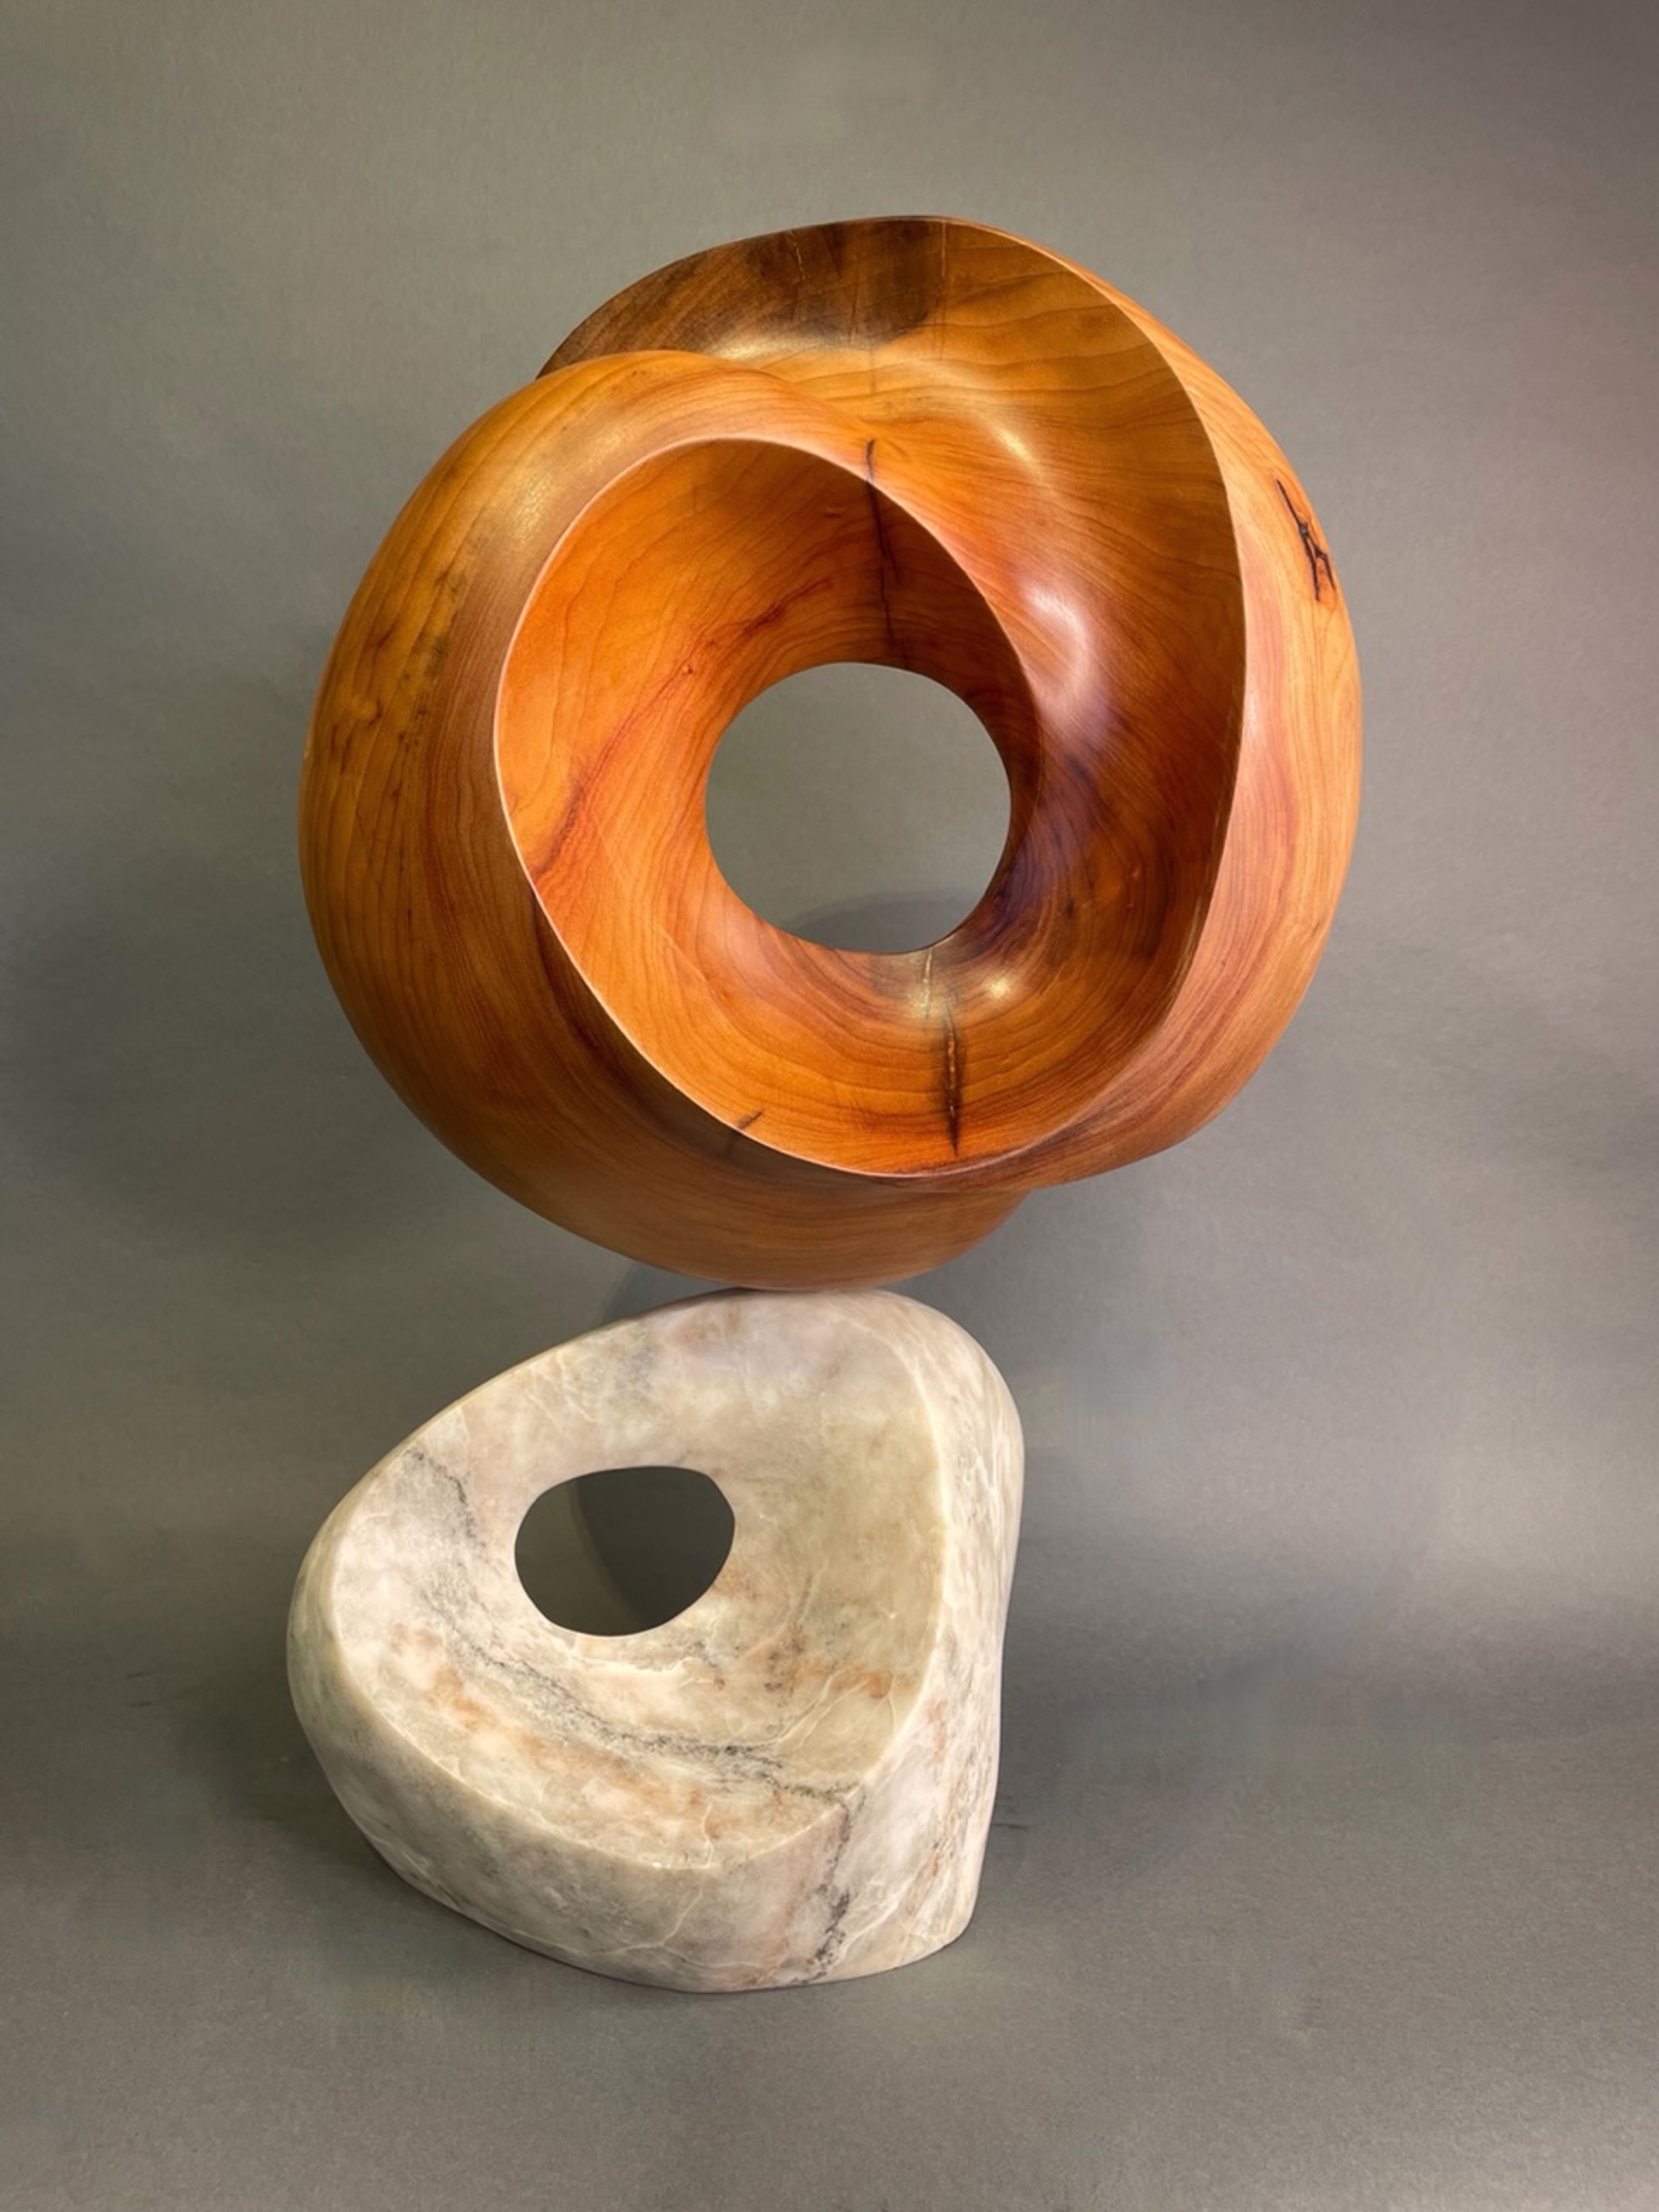 Introspect (Camphor Wood and Alabaster) by Steve Turnbull